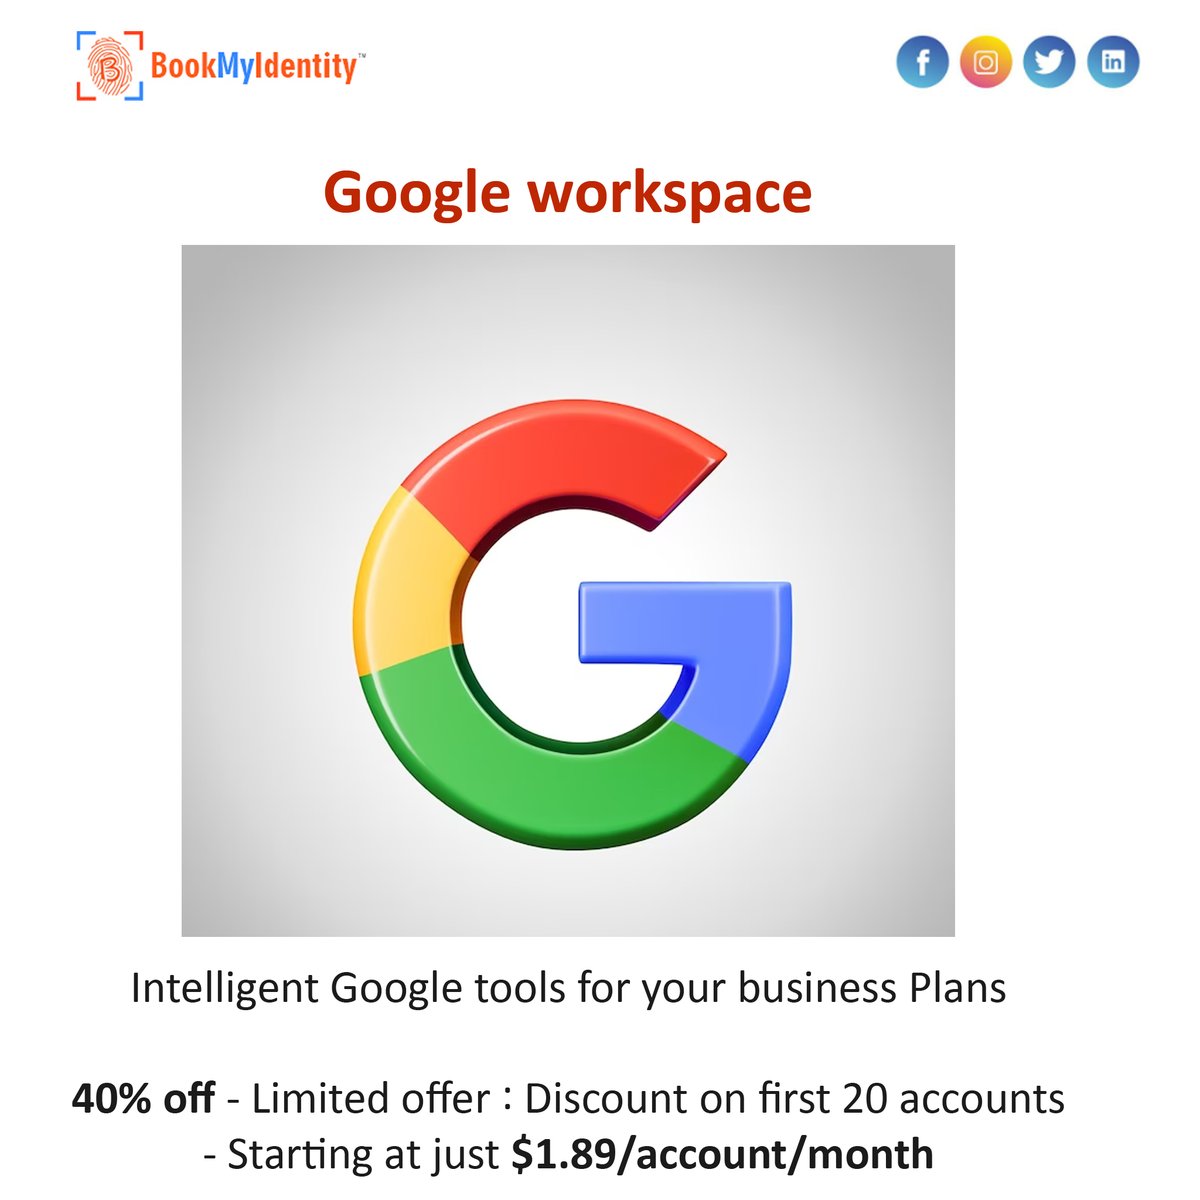 𝗚𝗼𝗼𝗴𝗹𝗲 𝘄𝗼𝗿𝗸𝘀𝗽𝗮𝗰𝗲

Discount 40% off on first 20 accounts
Starting at just $1.89/account/month

For More Offers Visit : bookmyidentity.com/google_apps.php

#gsuite #BookMyIdentity #googleservices #gmail #googlecloud #googledrive #googlecalender #googlekeep #googleexcelsheet